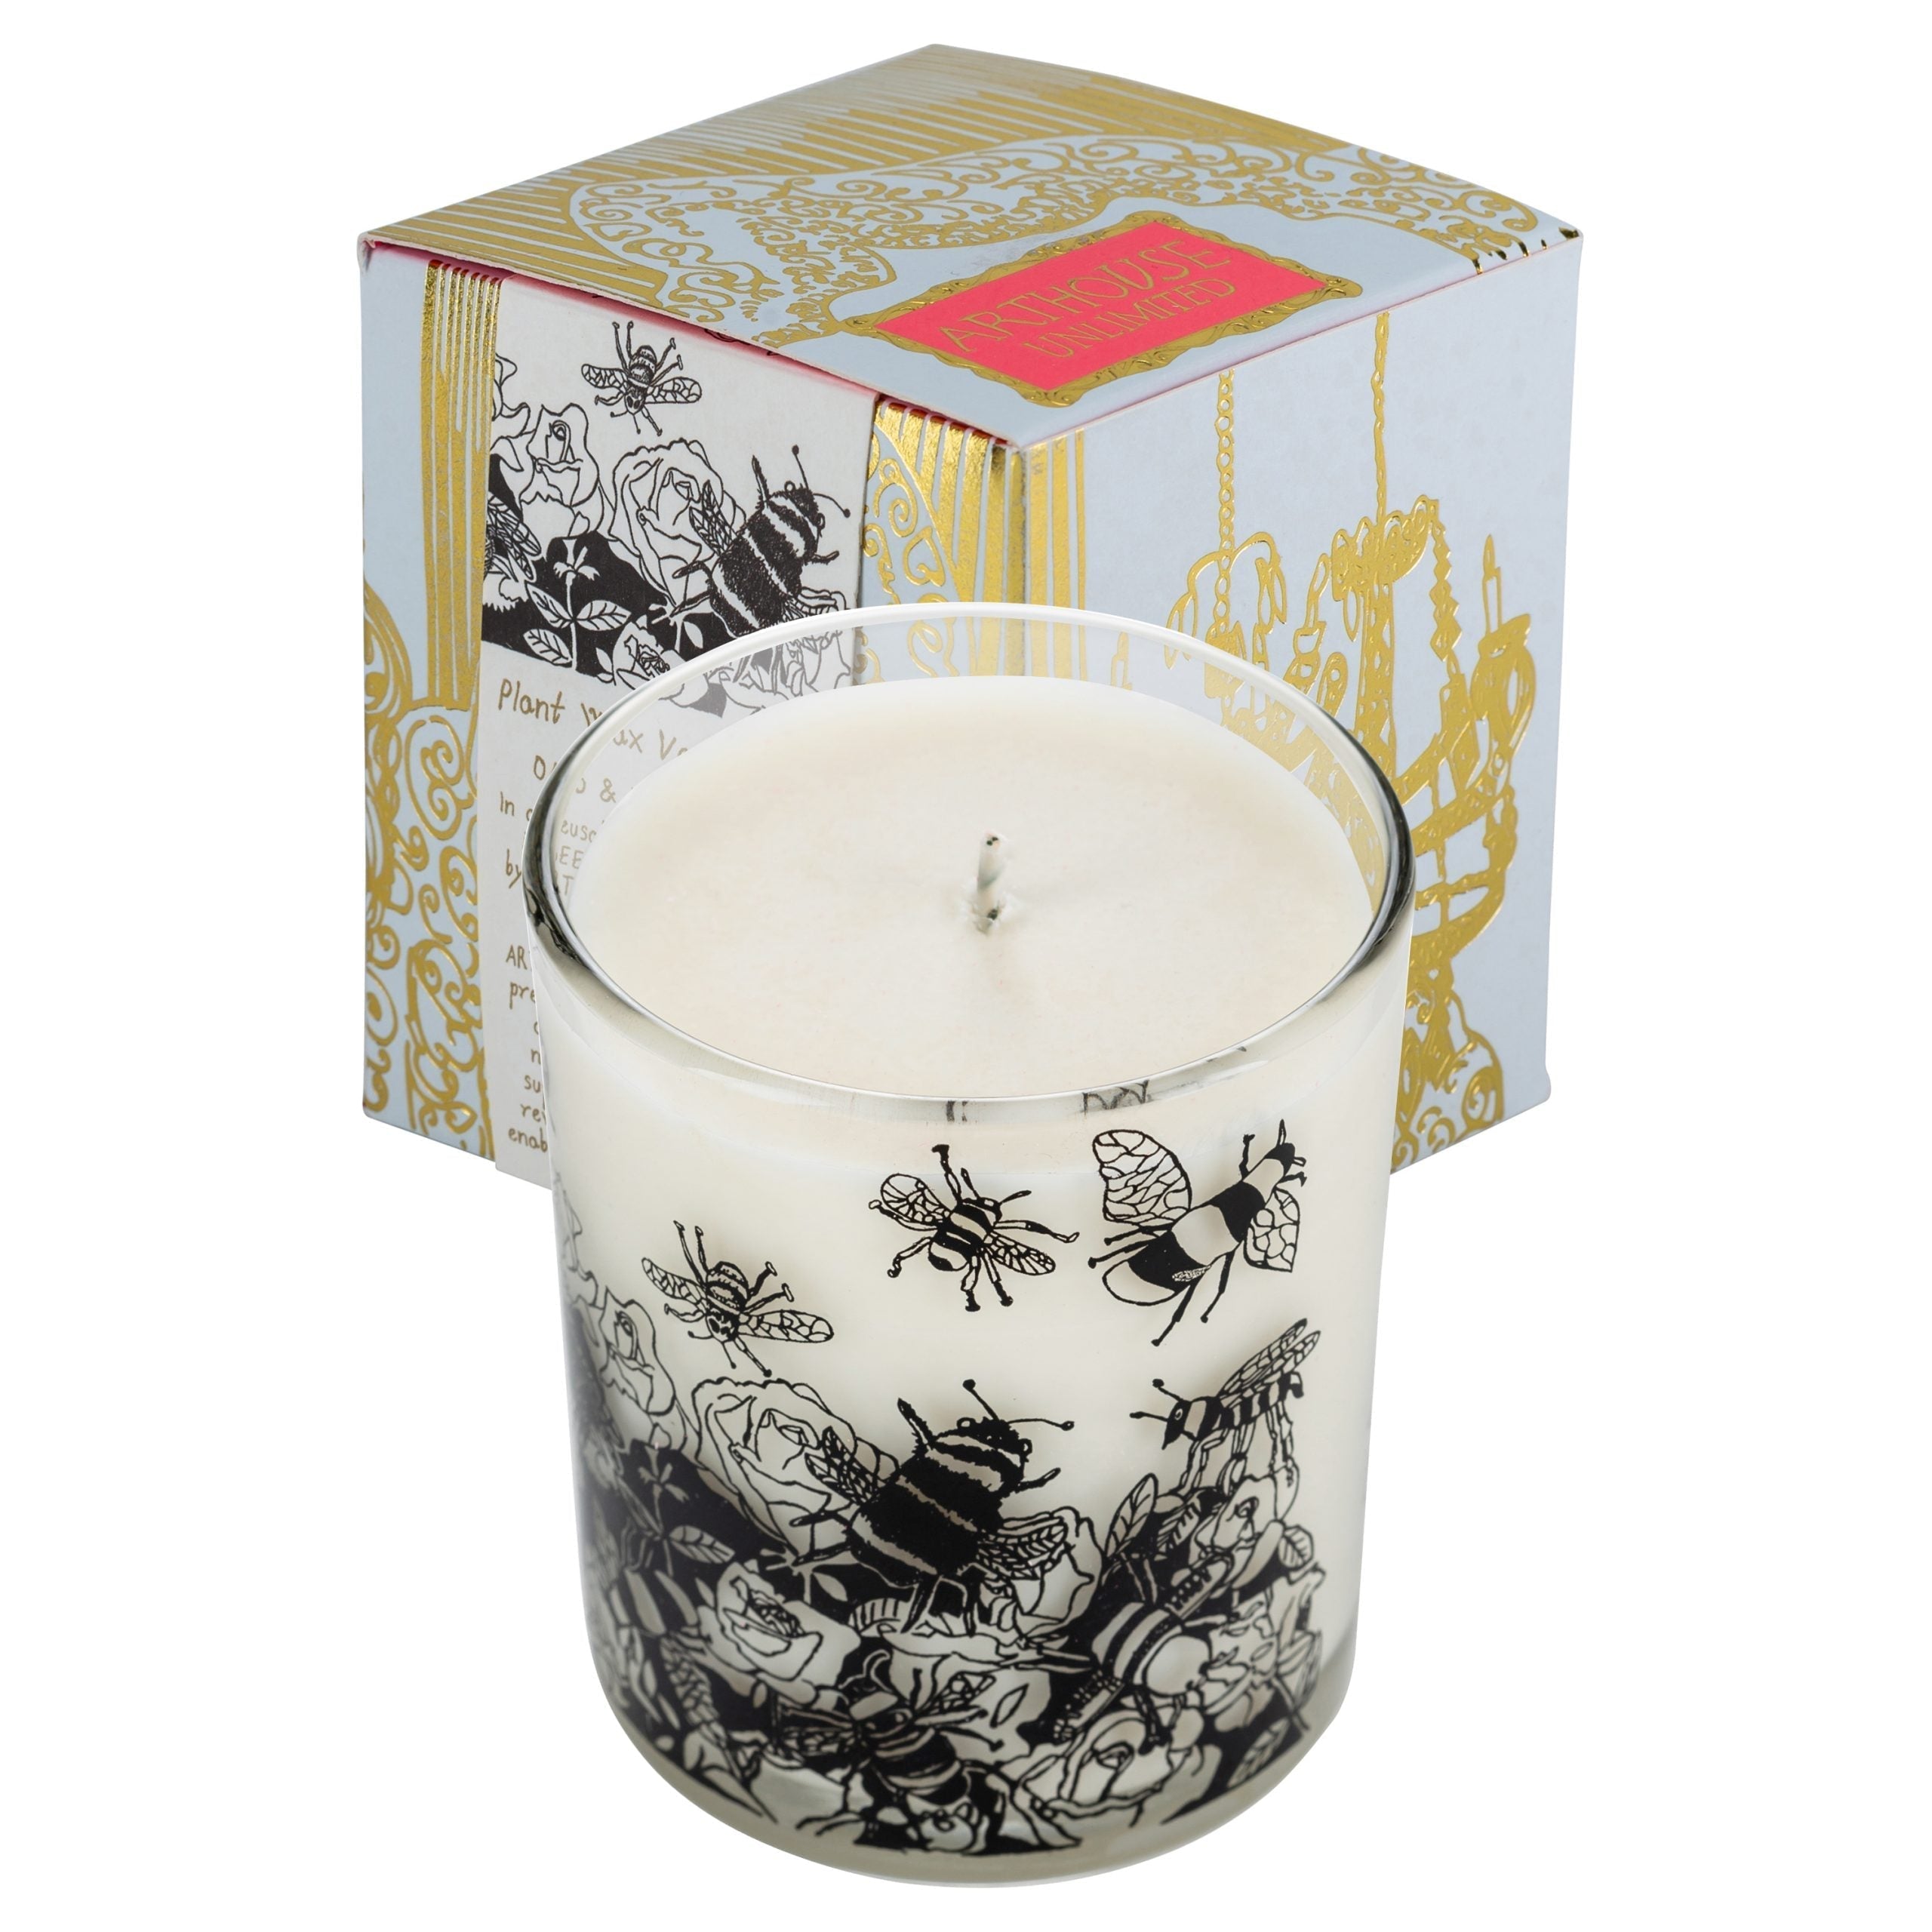 Bee Free Candle- Oats & Honey - The Nancy Smillie Shop - Art, Jewellery & Designer Gifts Glasgow